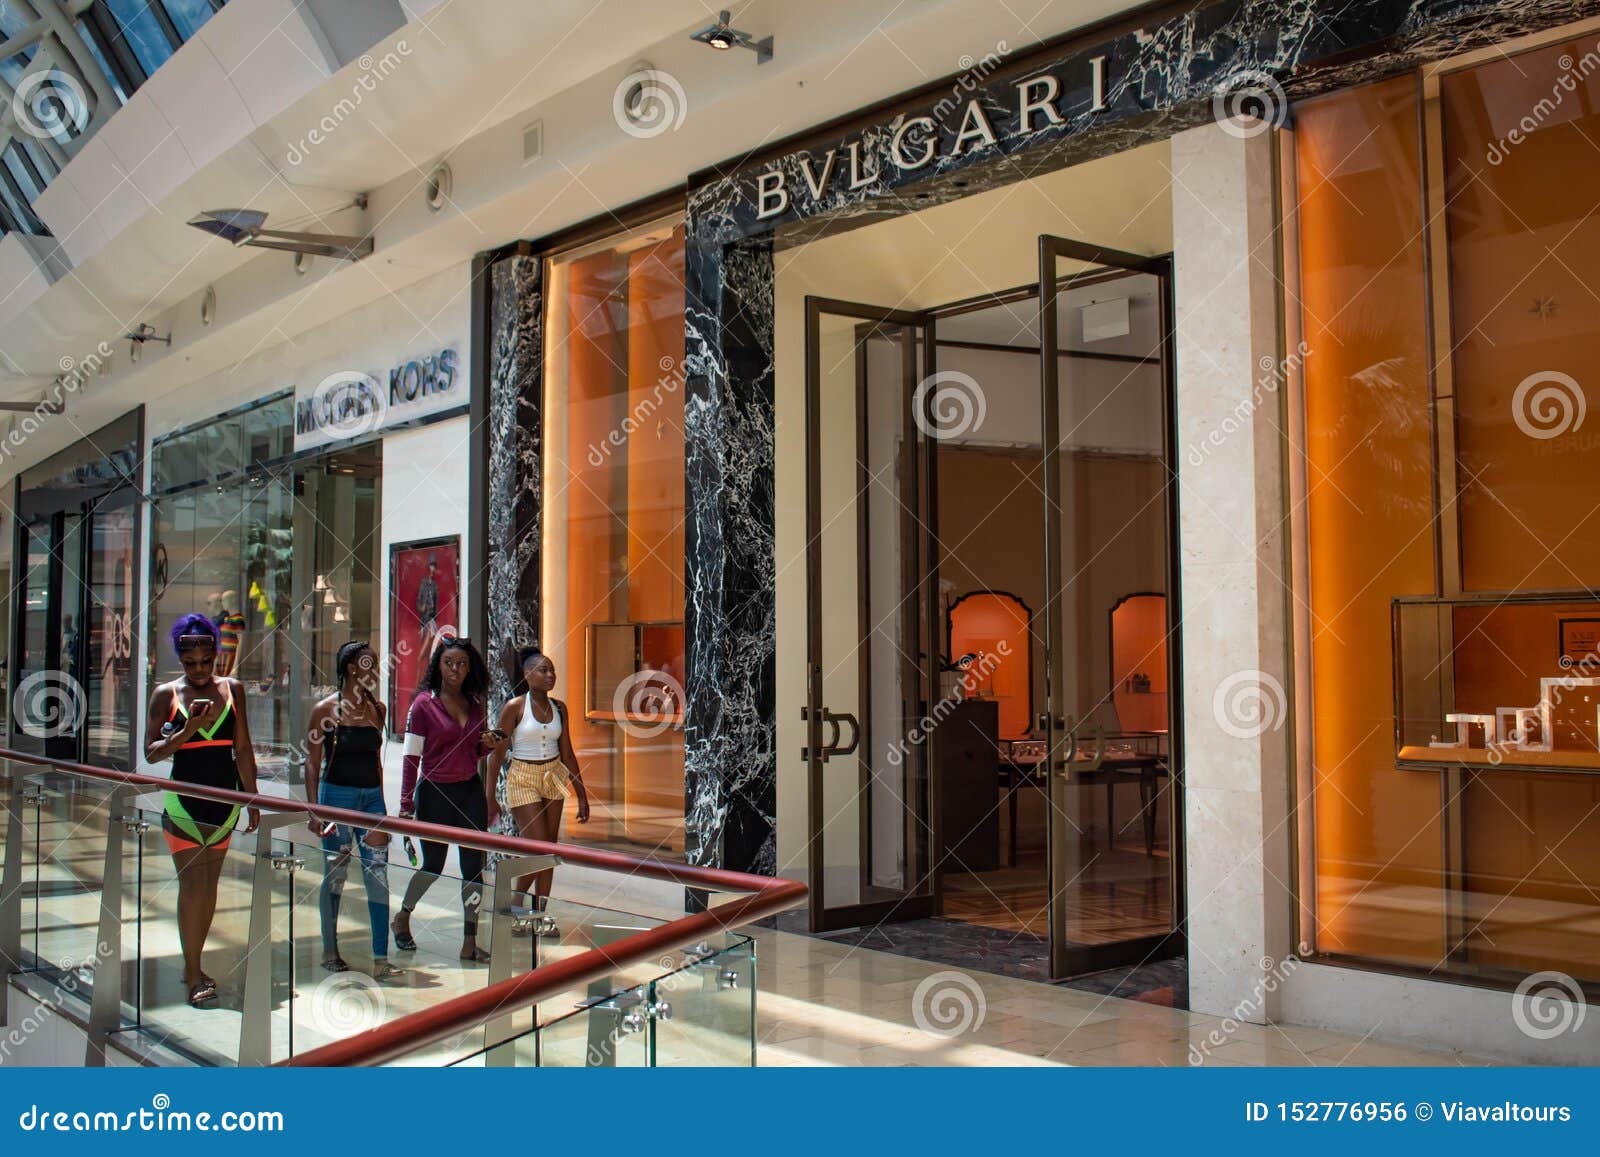 Orlando Florida June 6 2019  Michael Kors and Bvlgari stores in The  Mall at Millenia Stock Photo  Alamy